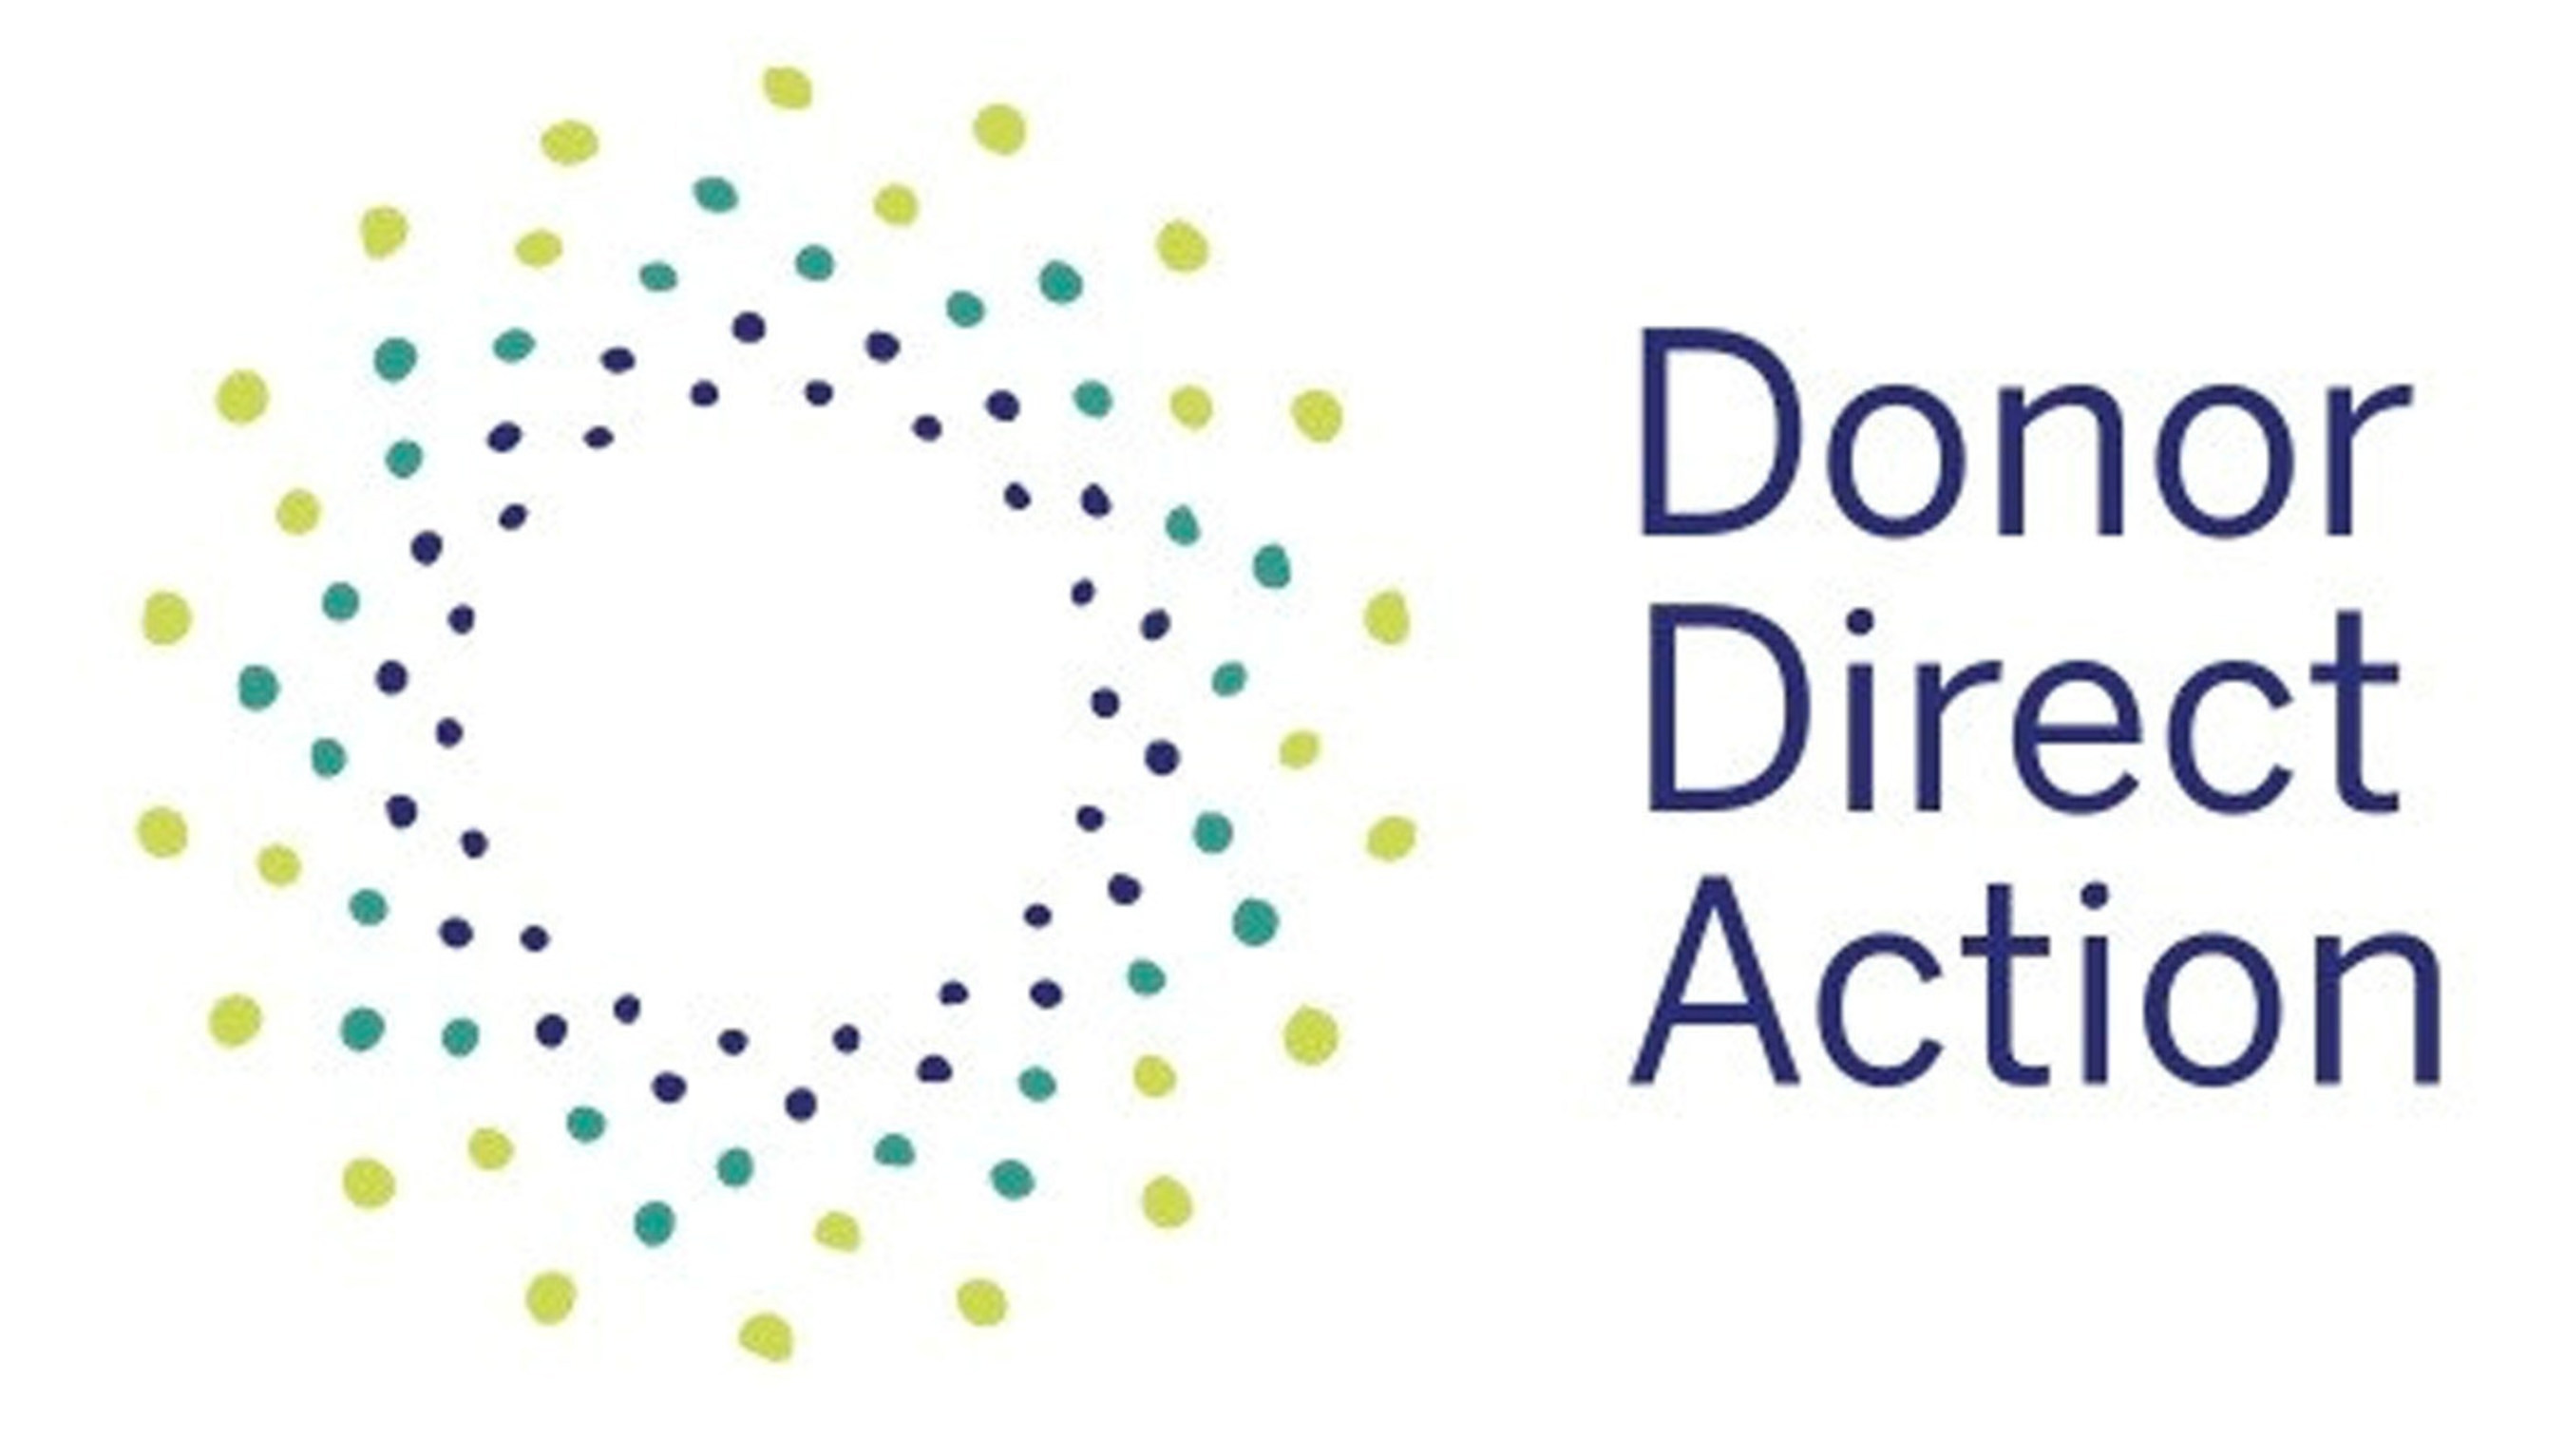 Donor Direct Action: Strengthening Women Worldwide